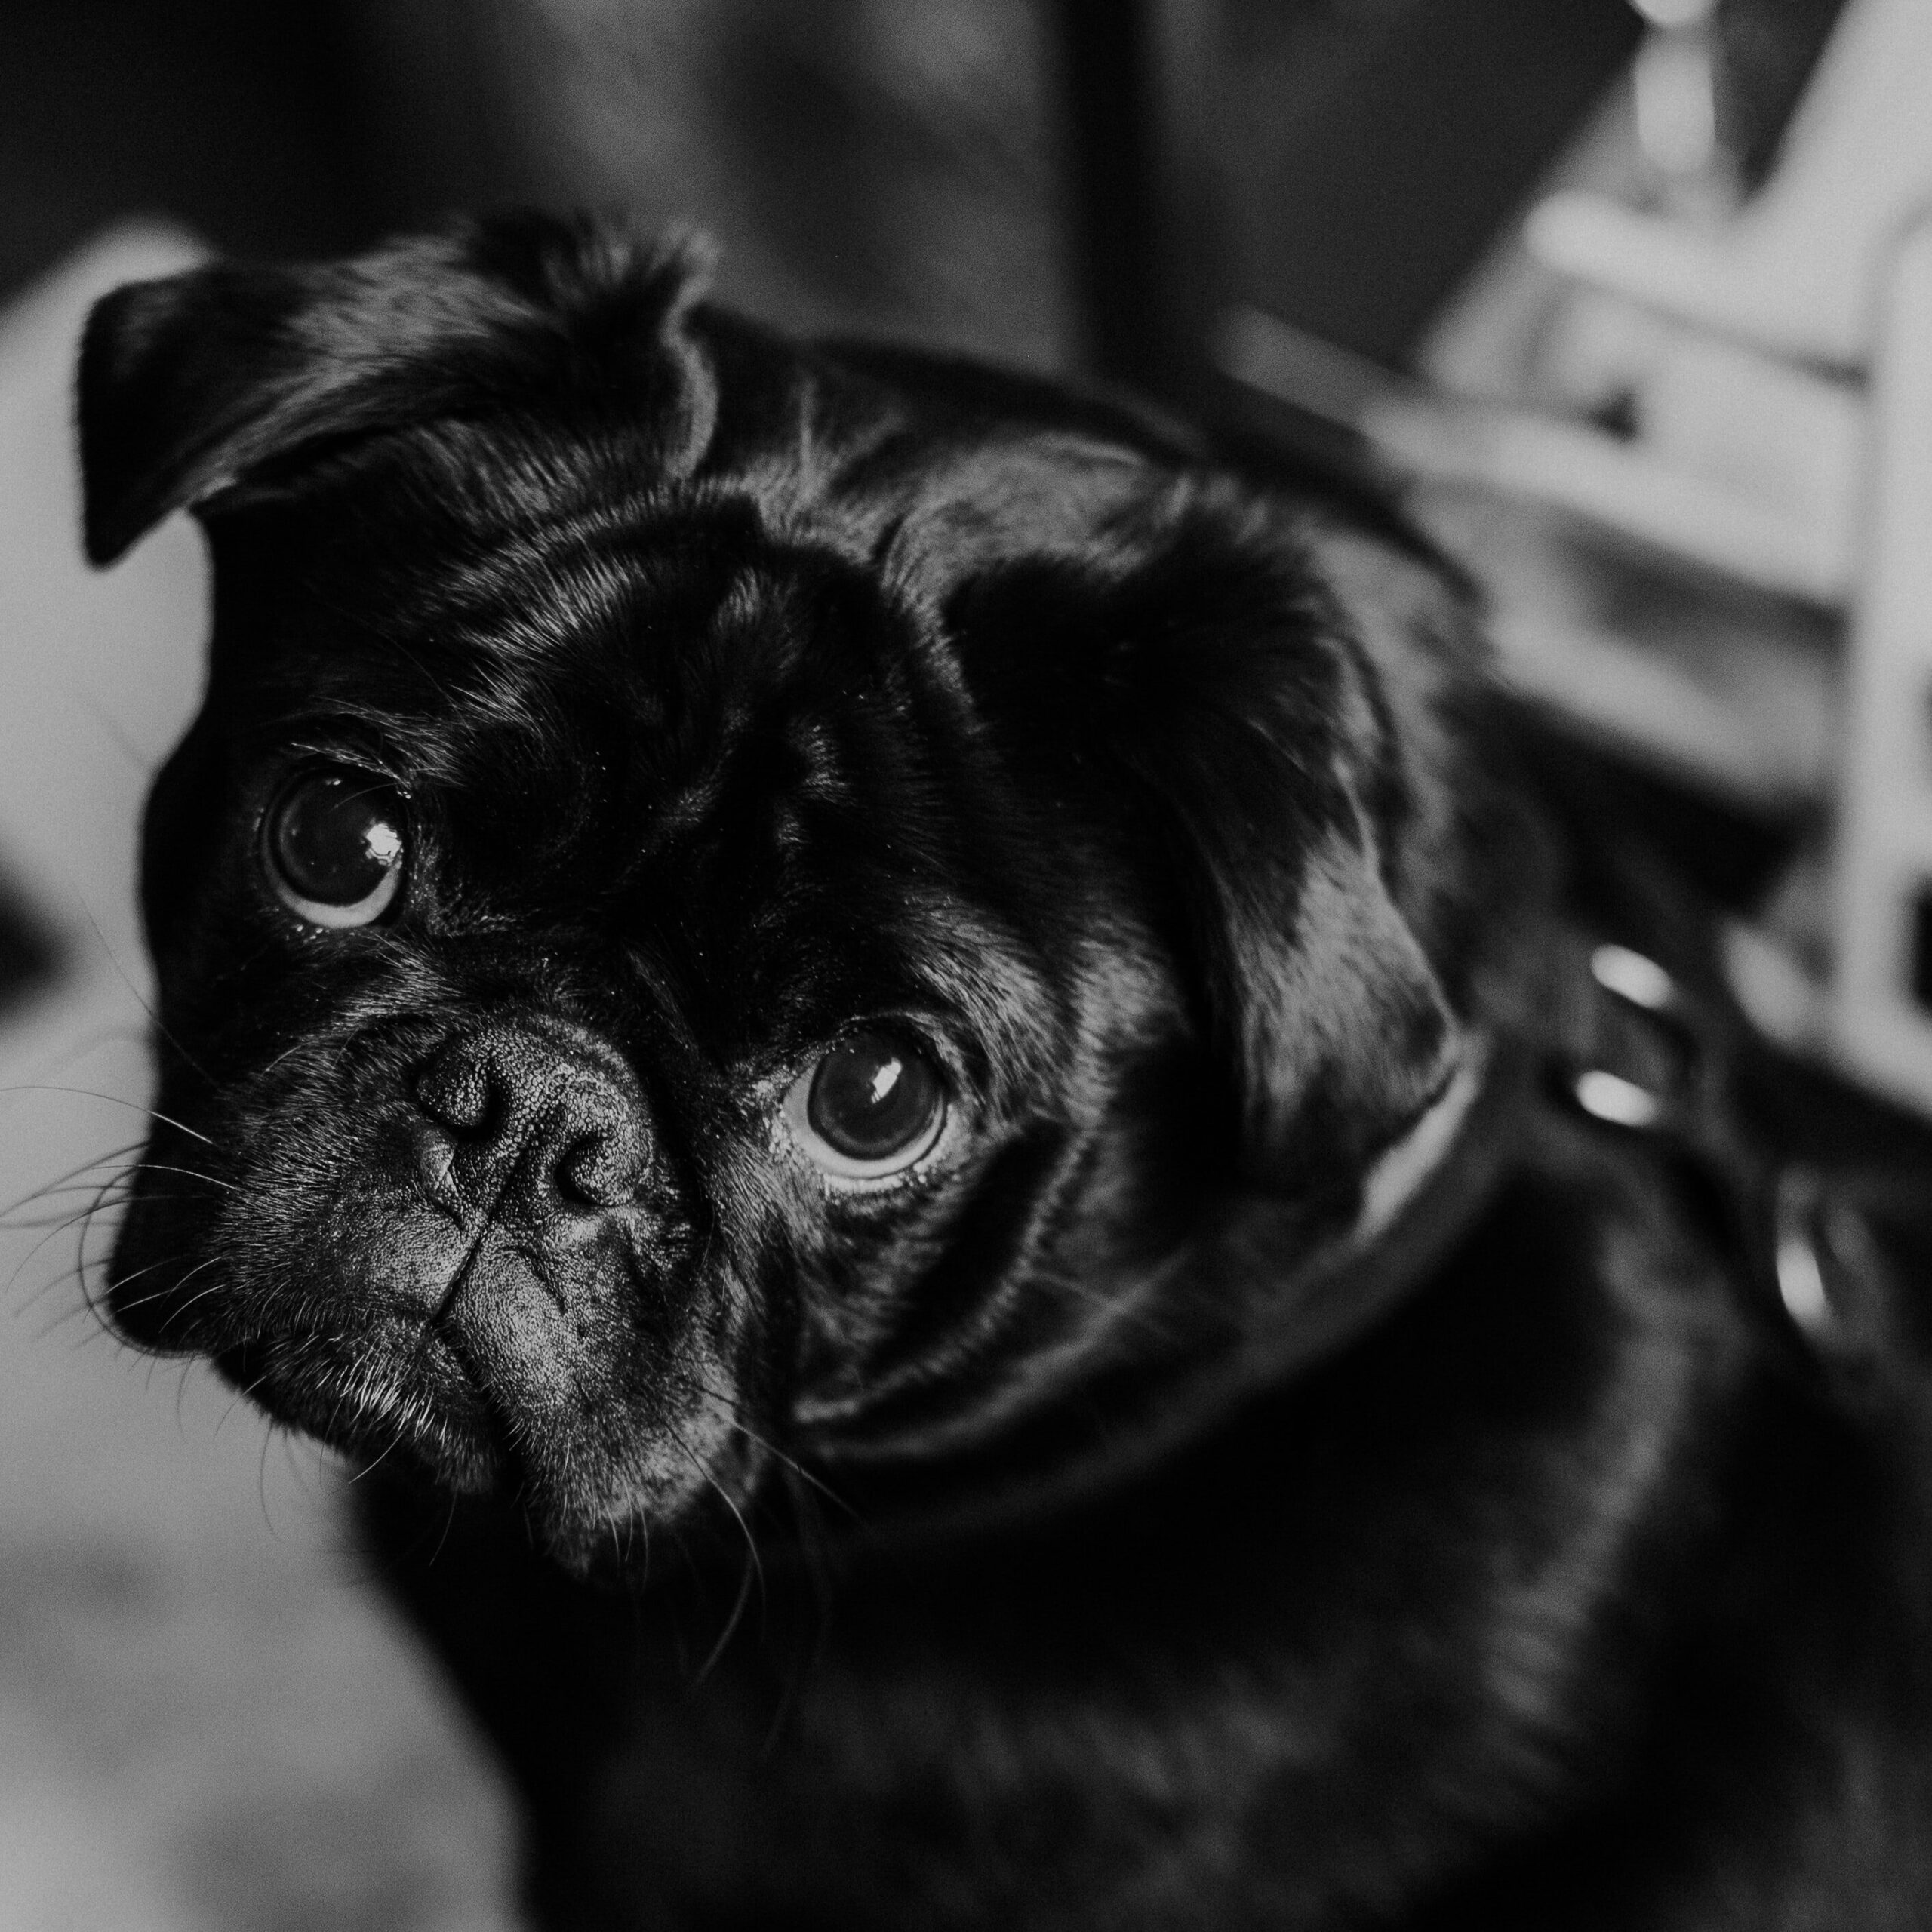 a black pug type dog shows us guilty eyes